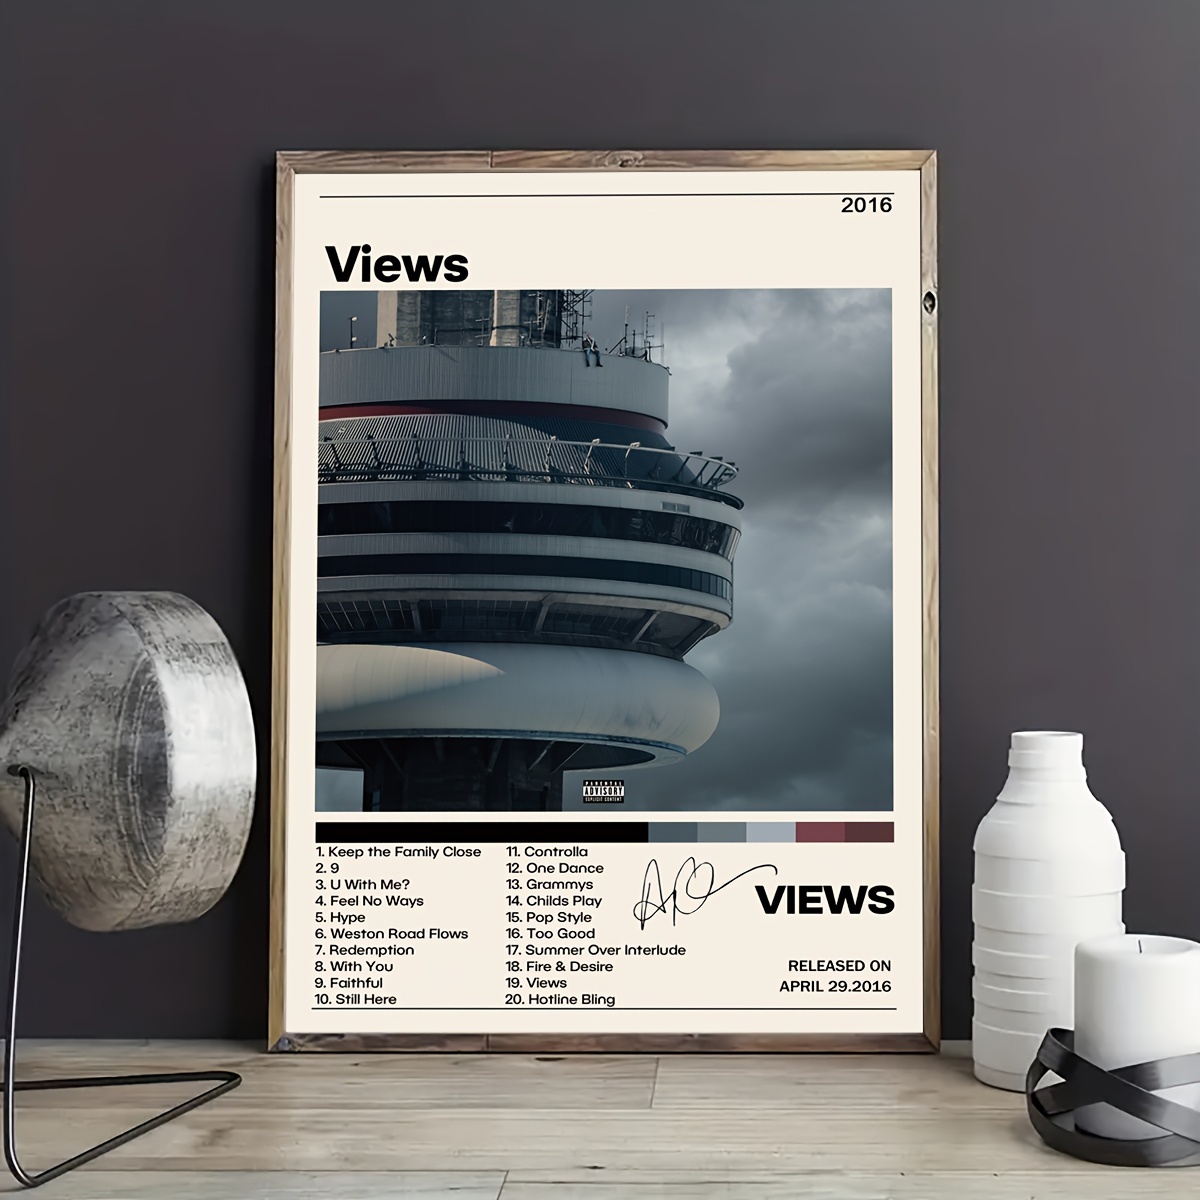  Drake Poster Set of 14 Album Cover Posters 8 x 12 inches  Music Posters for Room Aesthetic Wall Art for Teens Room Decor UNFRAMED  (Drake): Posters & Prints